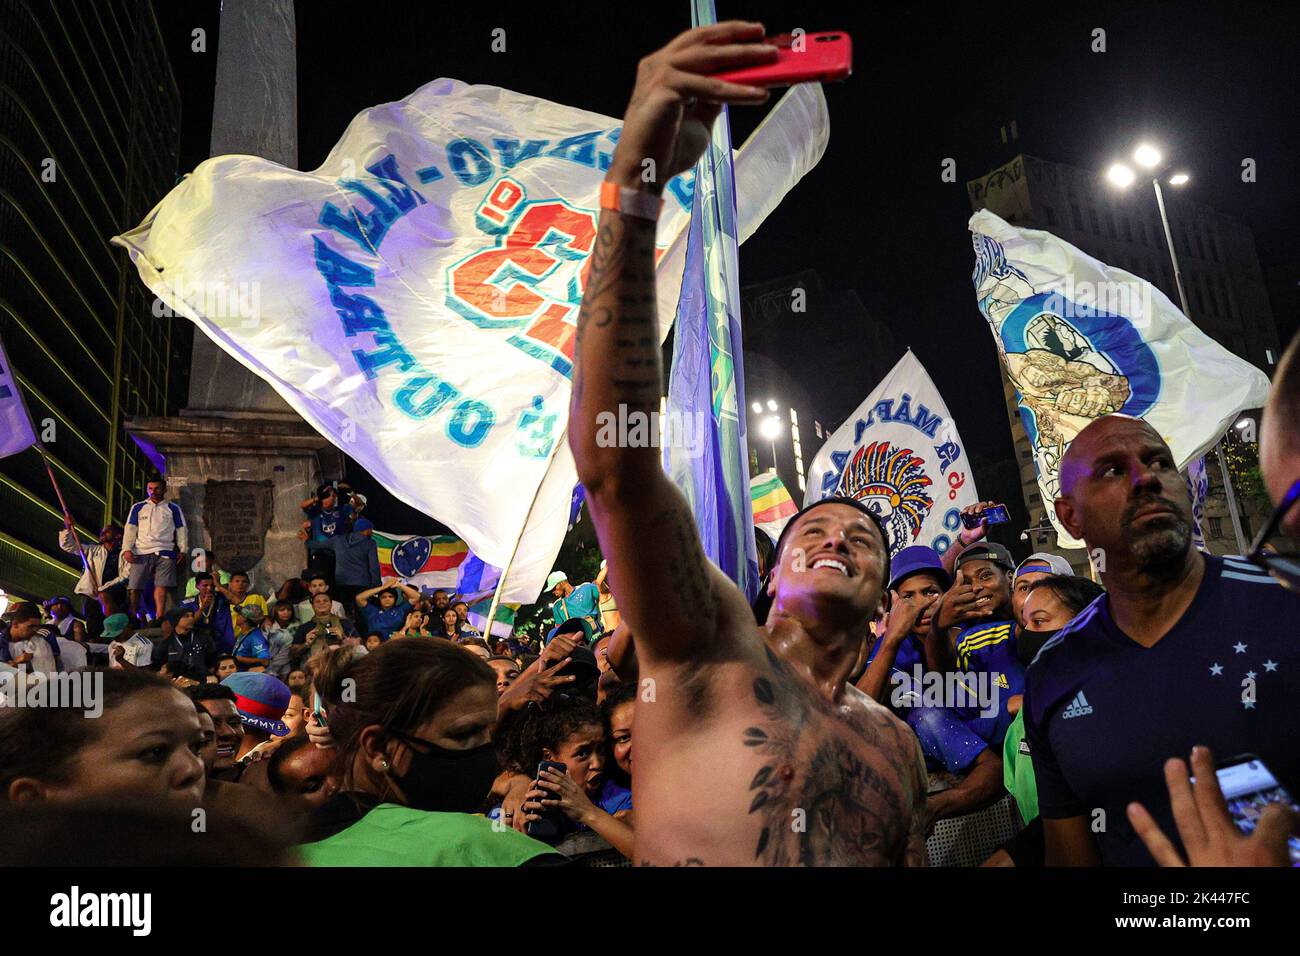 Belo Horizonte, Brazil. 30th Sep, 2022. MG - Belo Horizonte - 09/29/2022 - CRUZEIRO, CELEBRATION ACCESS SERIE A - Player Edu do Cruzeiro in Praca seven, downtown Belo Horizonte, during the celebration of winning access to the Series A by the Cruzeiro team. The team guaranteed the return to Serie A in advance after disputing the access series in the 2022 season. Photo: Gilson Junio/AGIF/Sipa USA Credit: Sipa USA/Alamy Live News Stock Photo